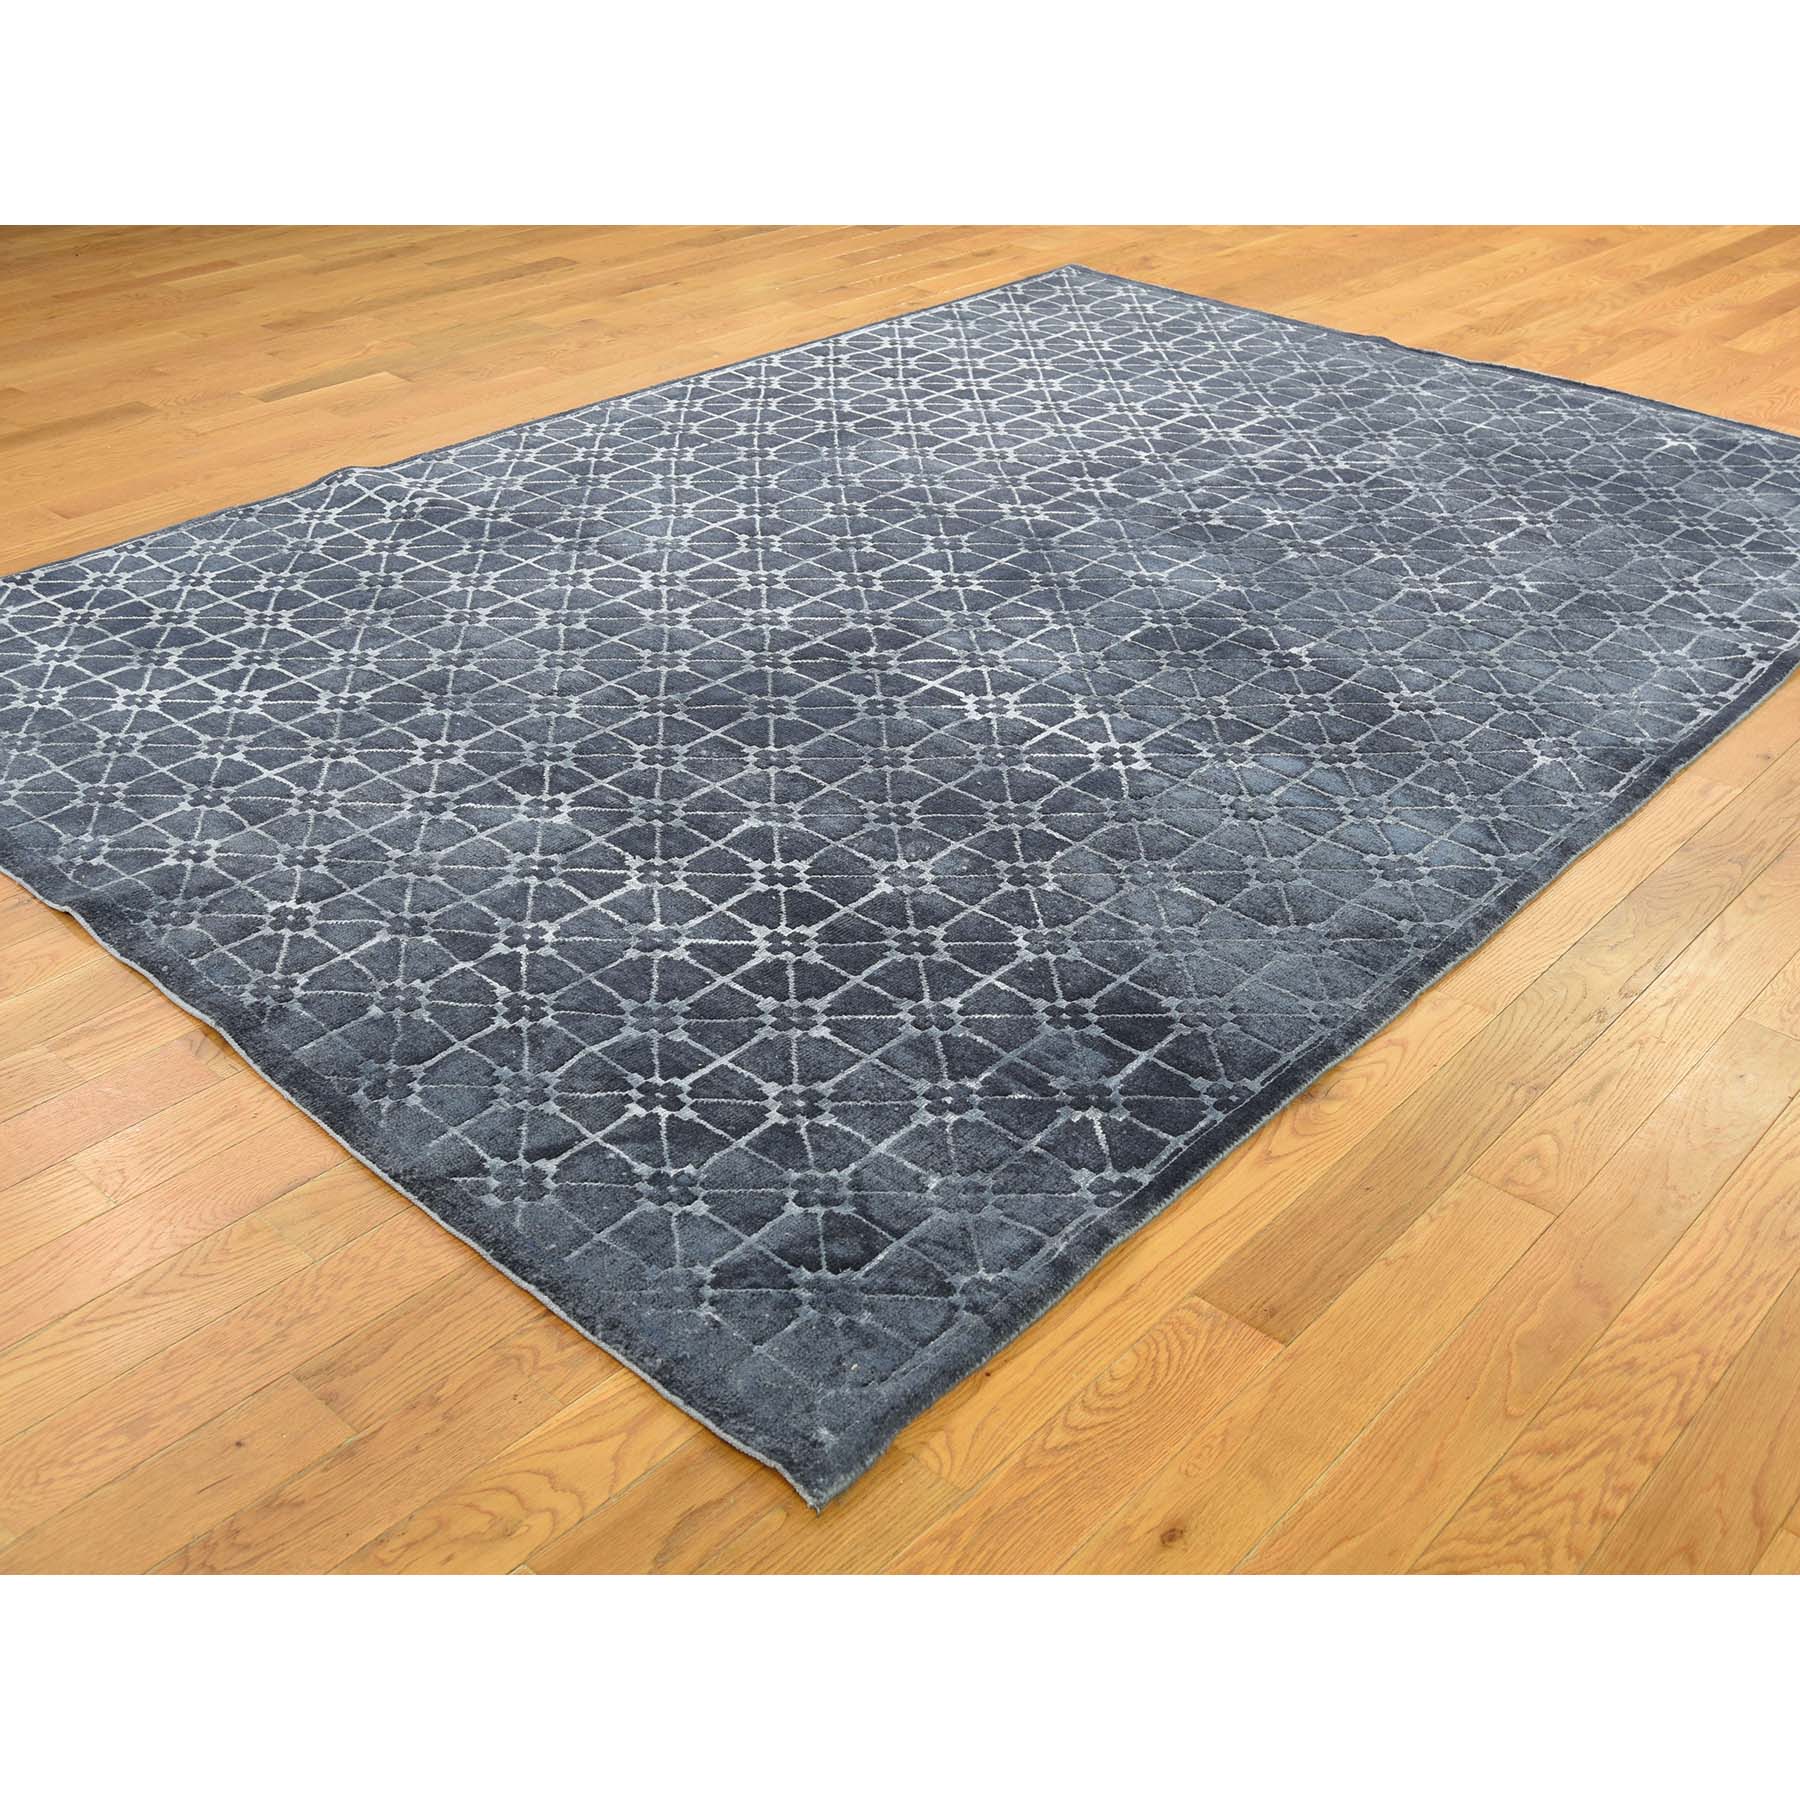 6-2 x8-10  Pure Wool Overdyed Trellis Design Hand-Knotted Oriental Rug 